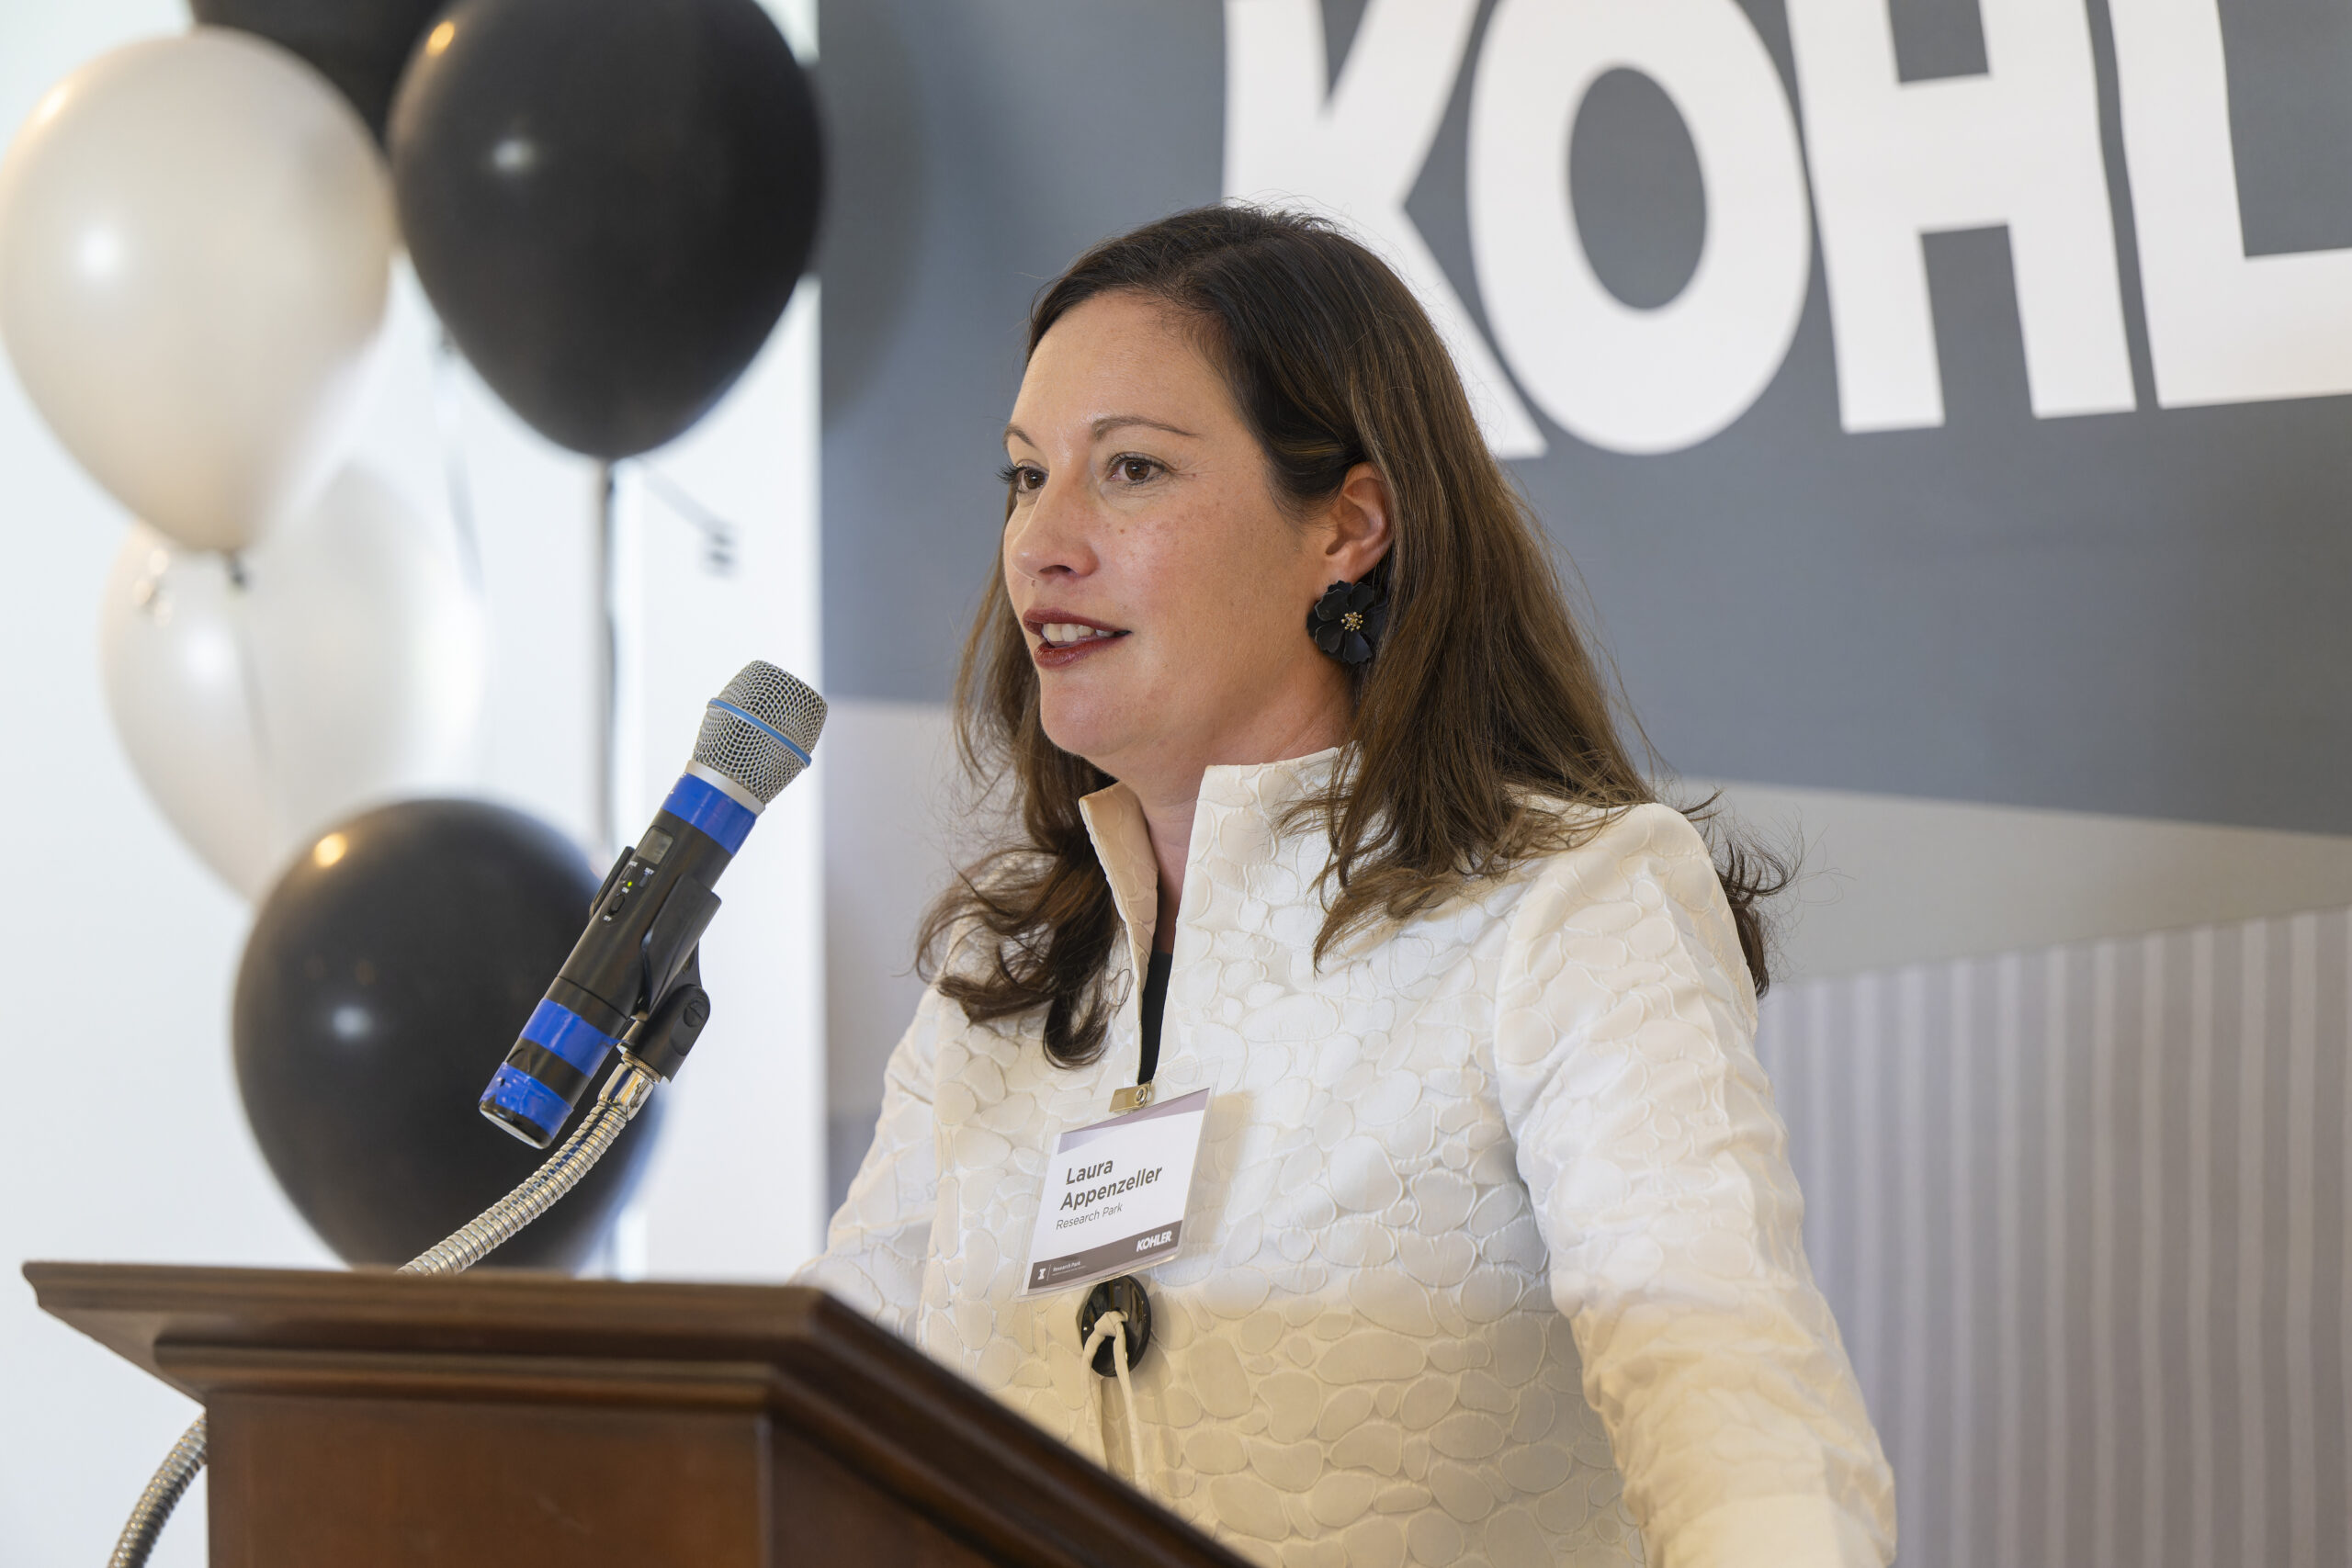 Research Park Director Laura Appenzeller gives Kohler a warm welcome to the Park.